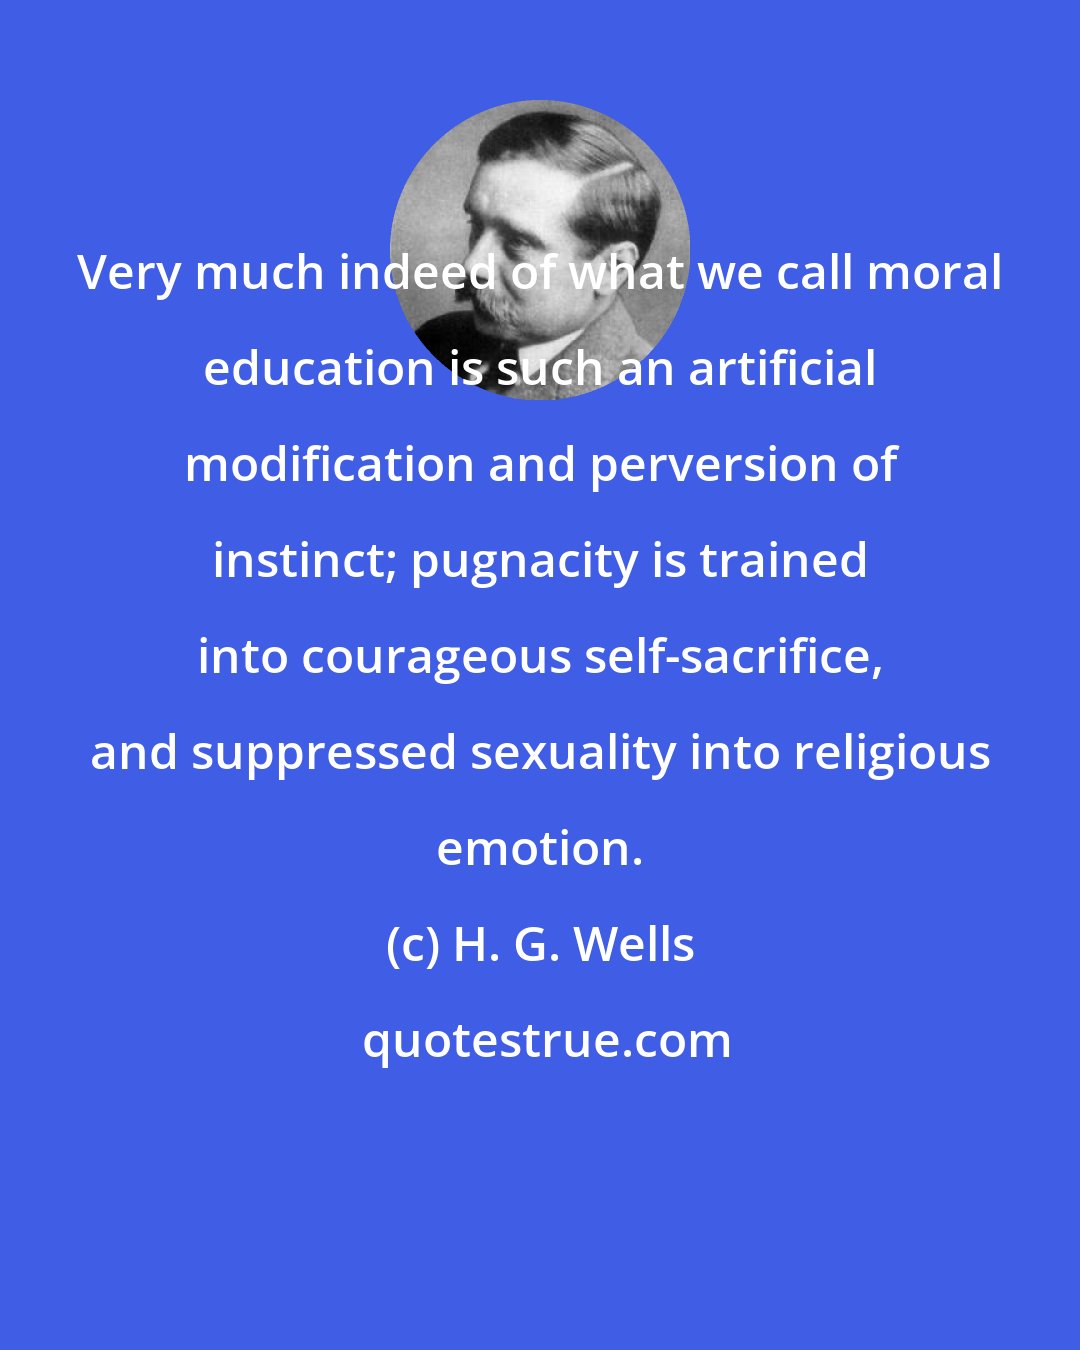 H. G. Wells: Very much indeed of what we call moral education is such an artificial modification and perversion of instinct; pugnacity is trained into courageous self-sacrifice, and suppressed sexuality into religious emotion.